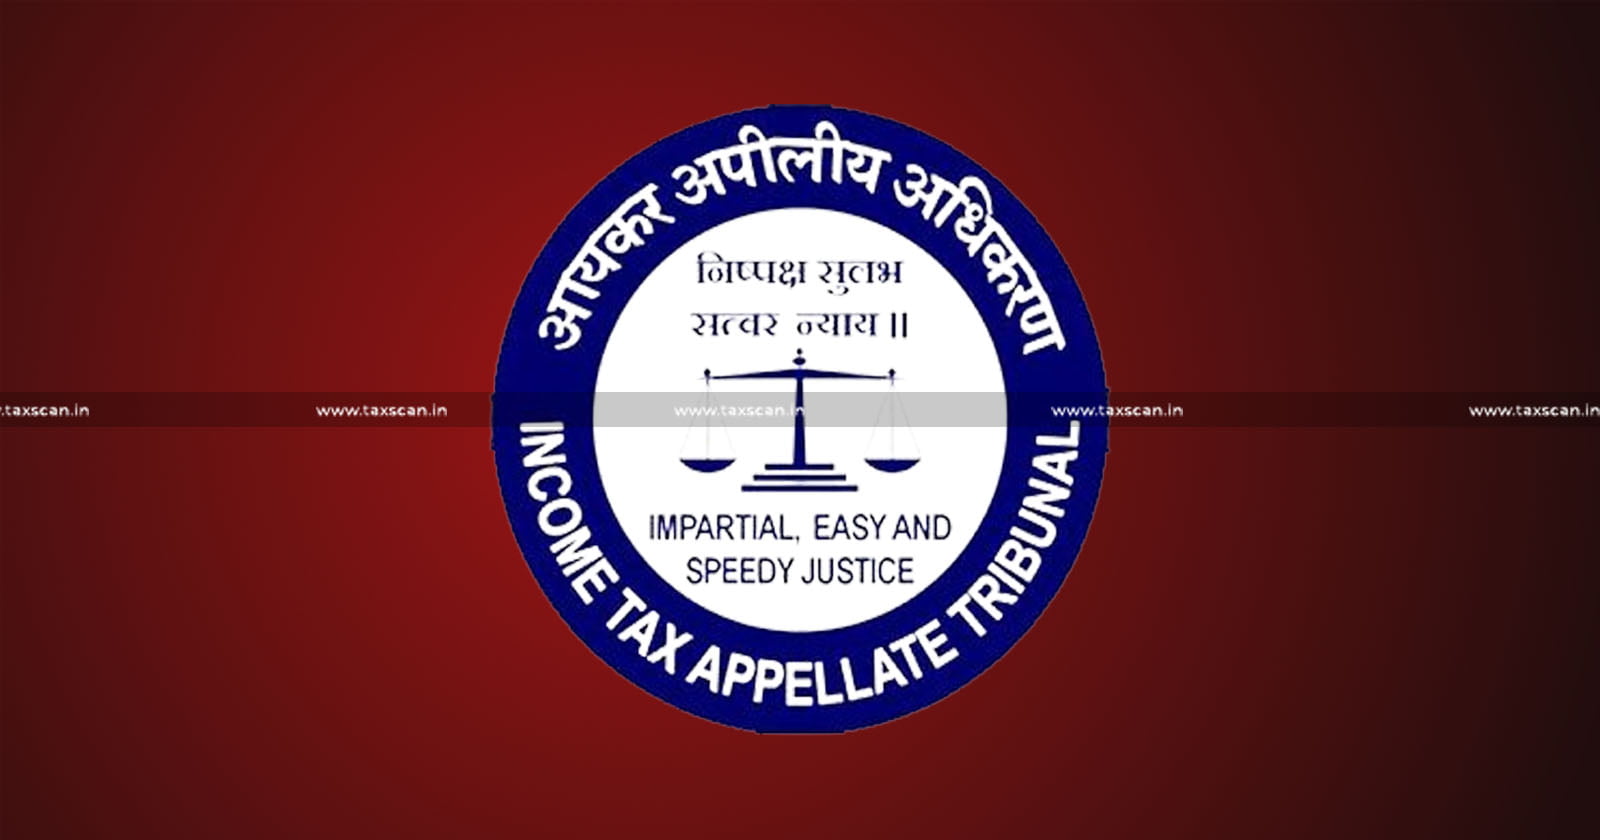 Income Tax Dept - income tax - Extended Time - Re-Assessment - Tangible Material - ITAT - Taxscan